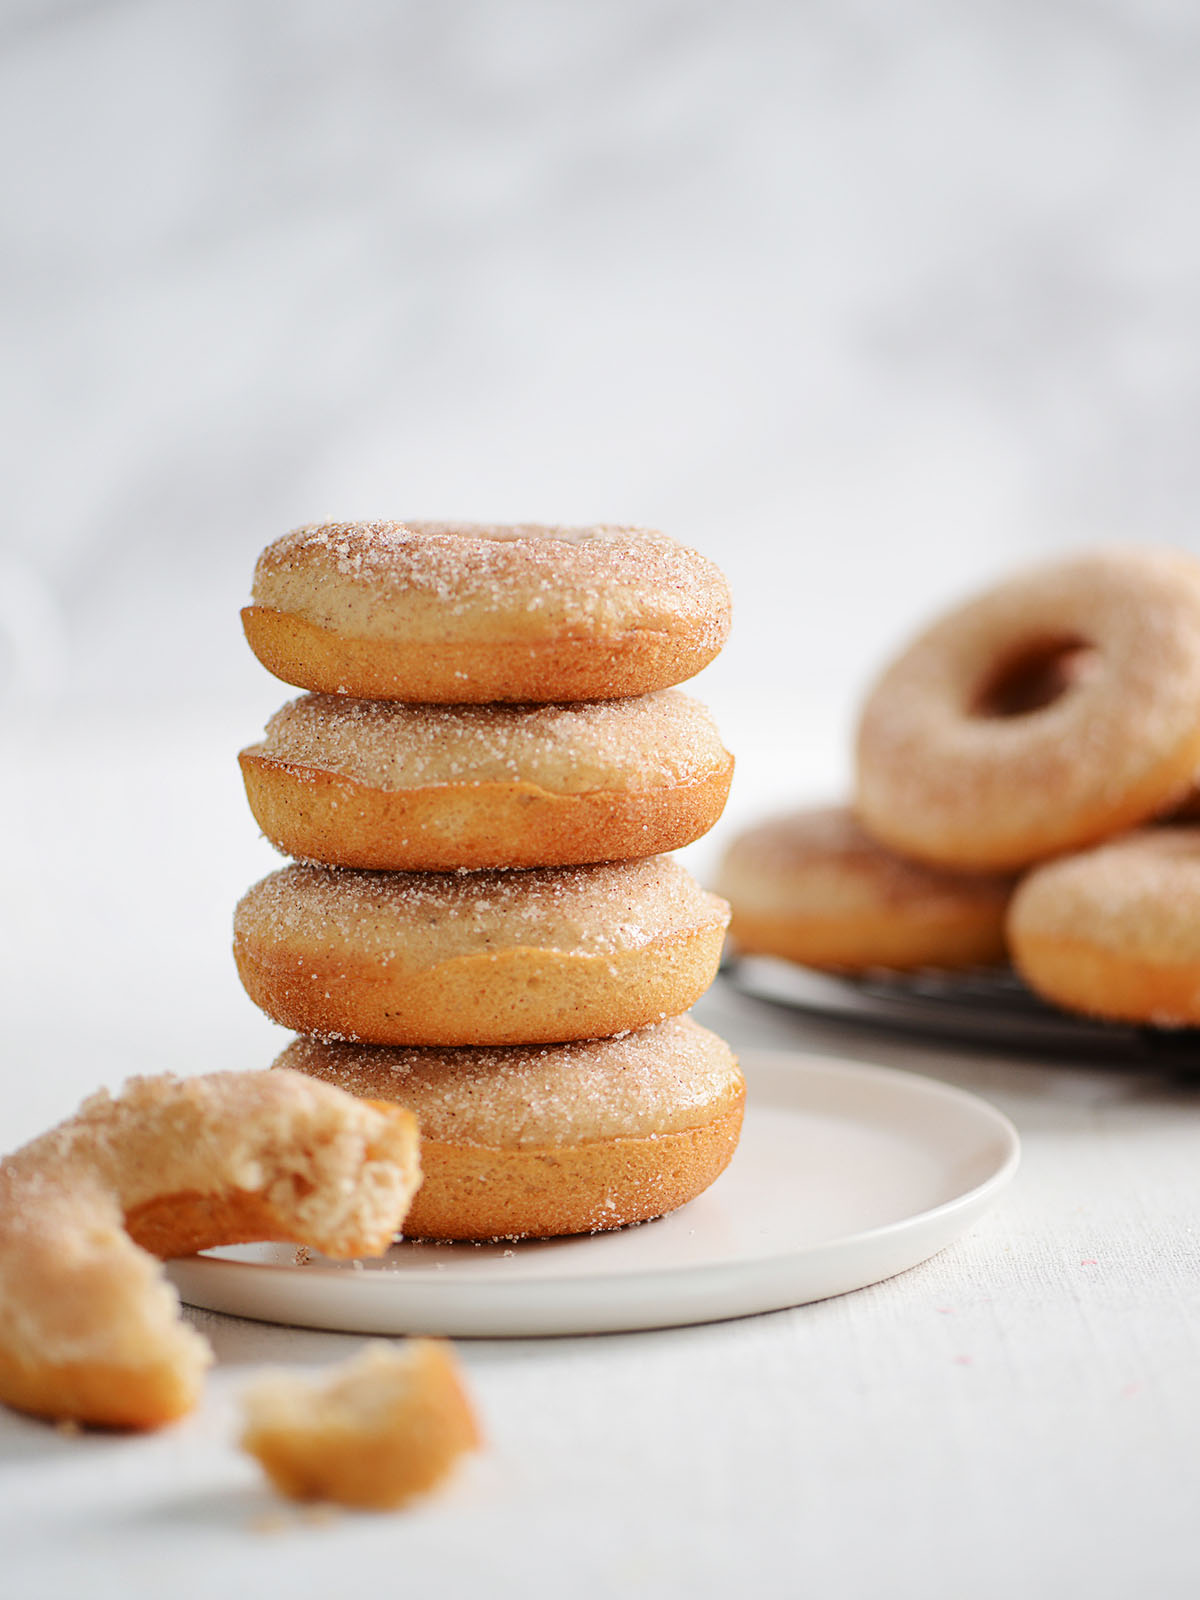 A stack of donuts placed on a plate.